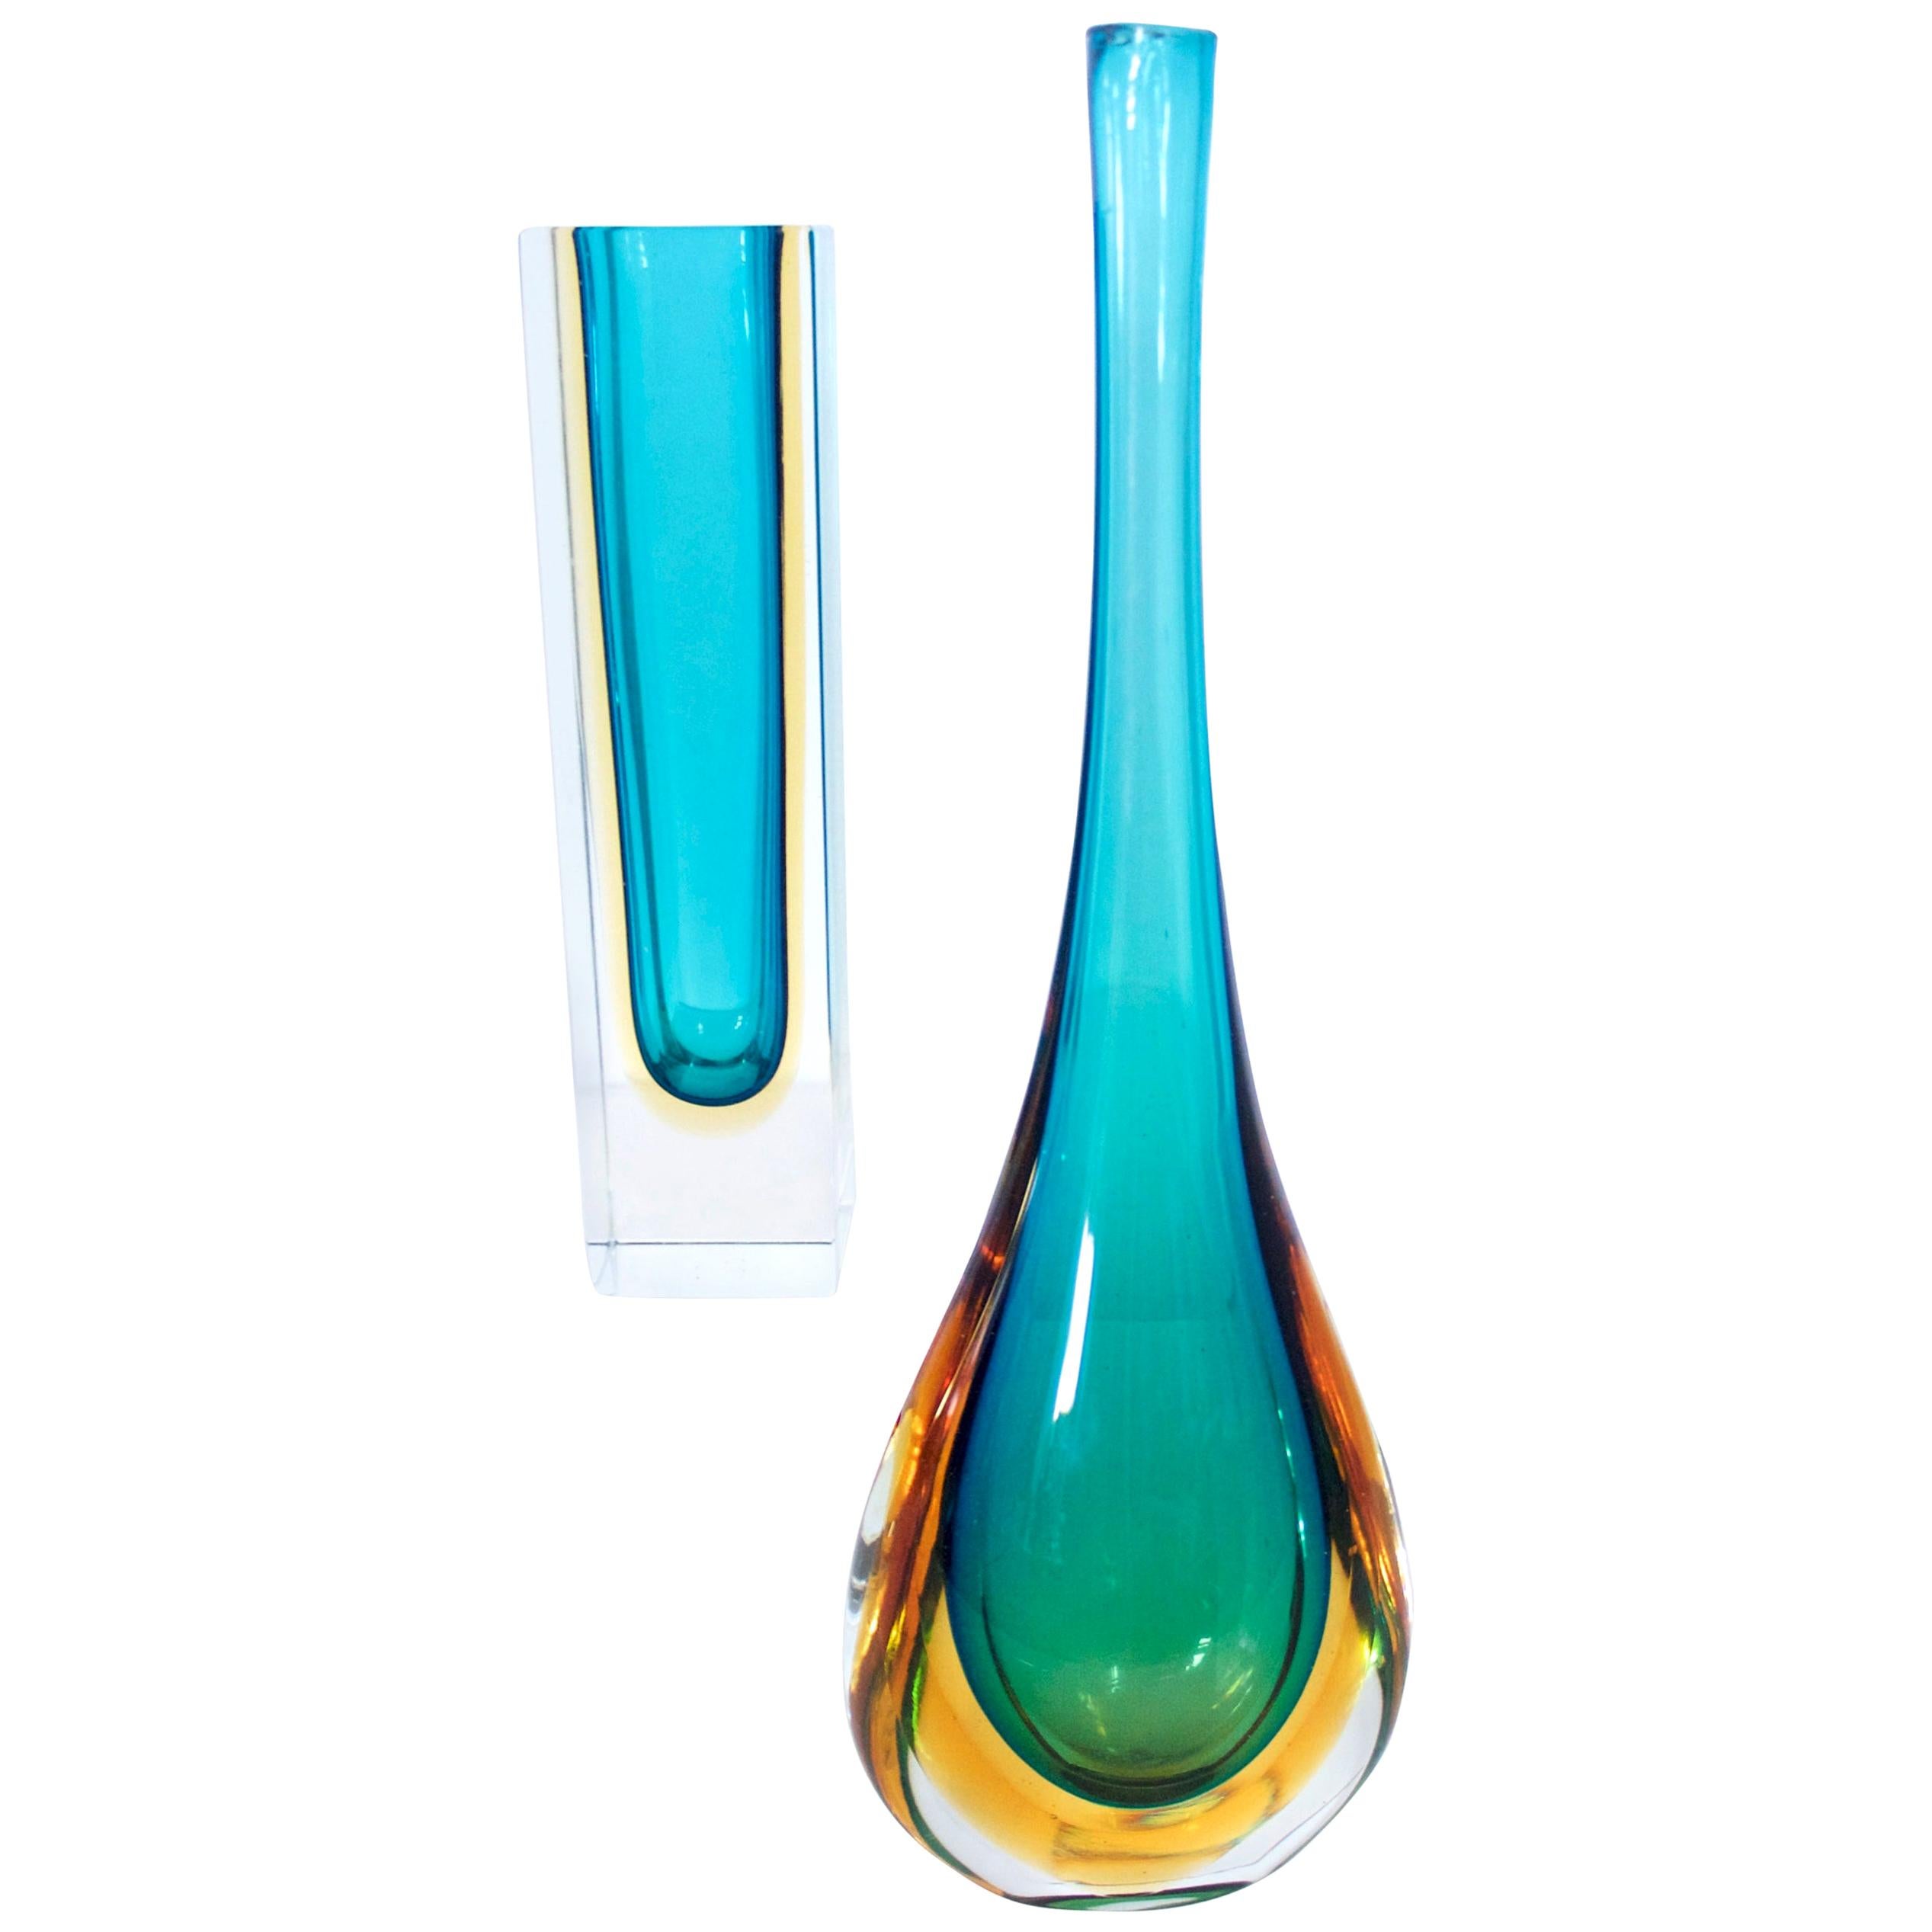 Murano Sommerso Tear Drop and Mandruzzato Pillar Vase, Jade Green and Yellow For Sale